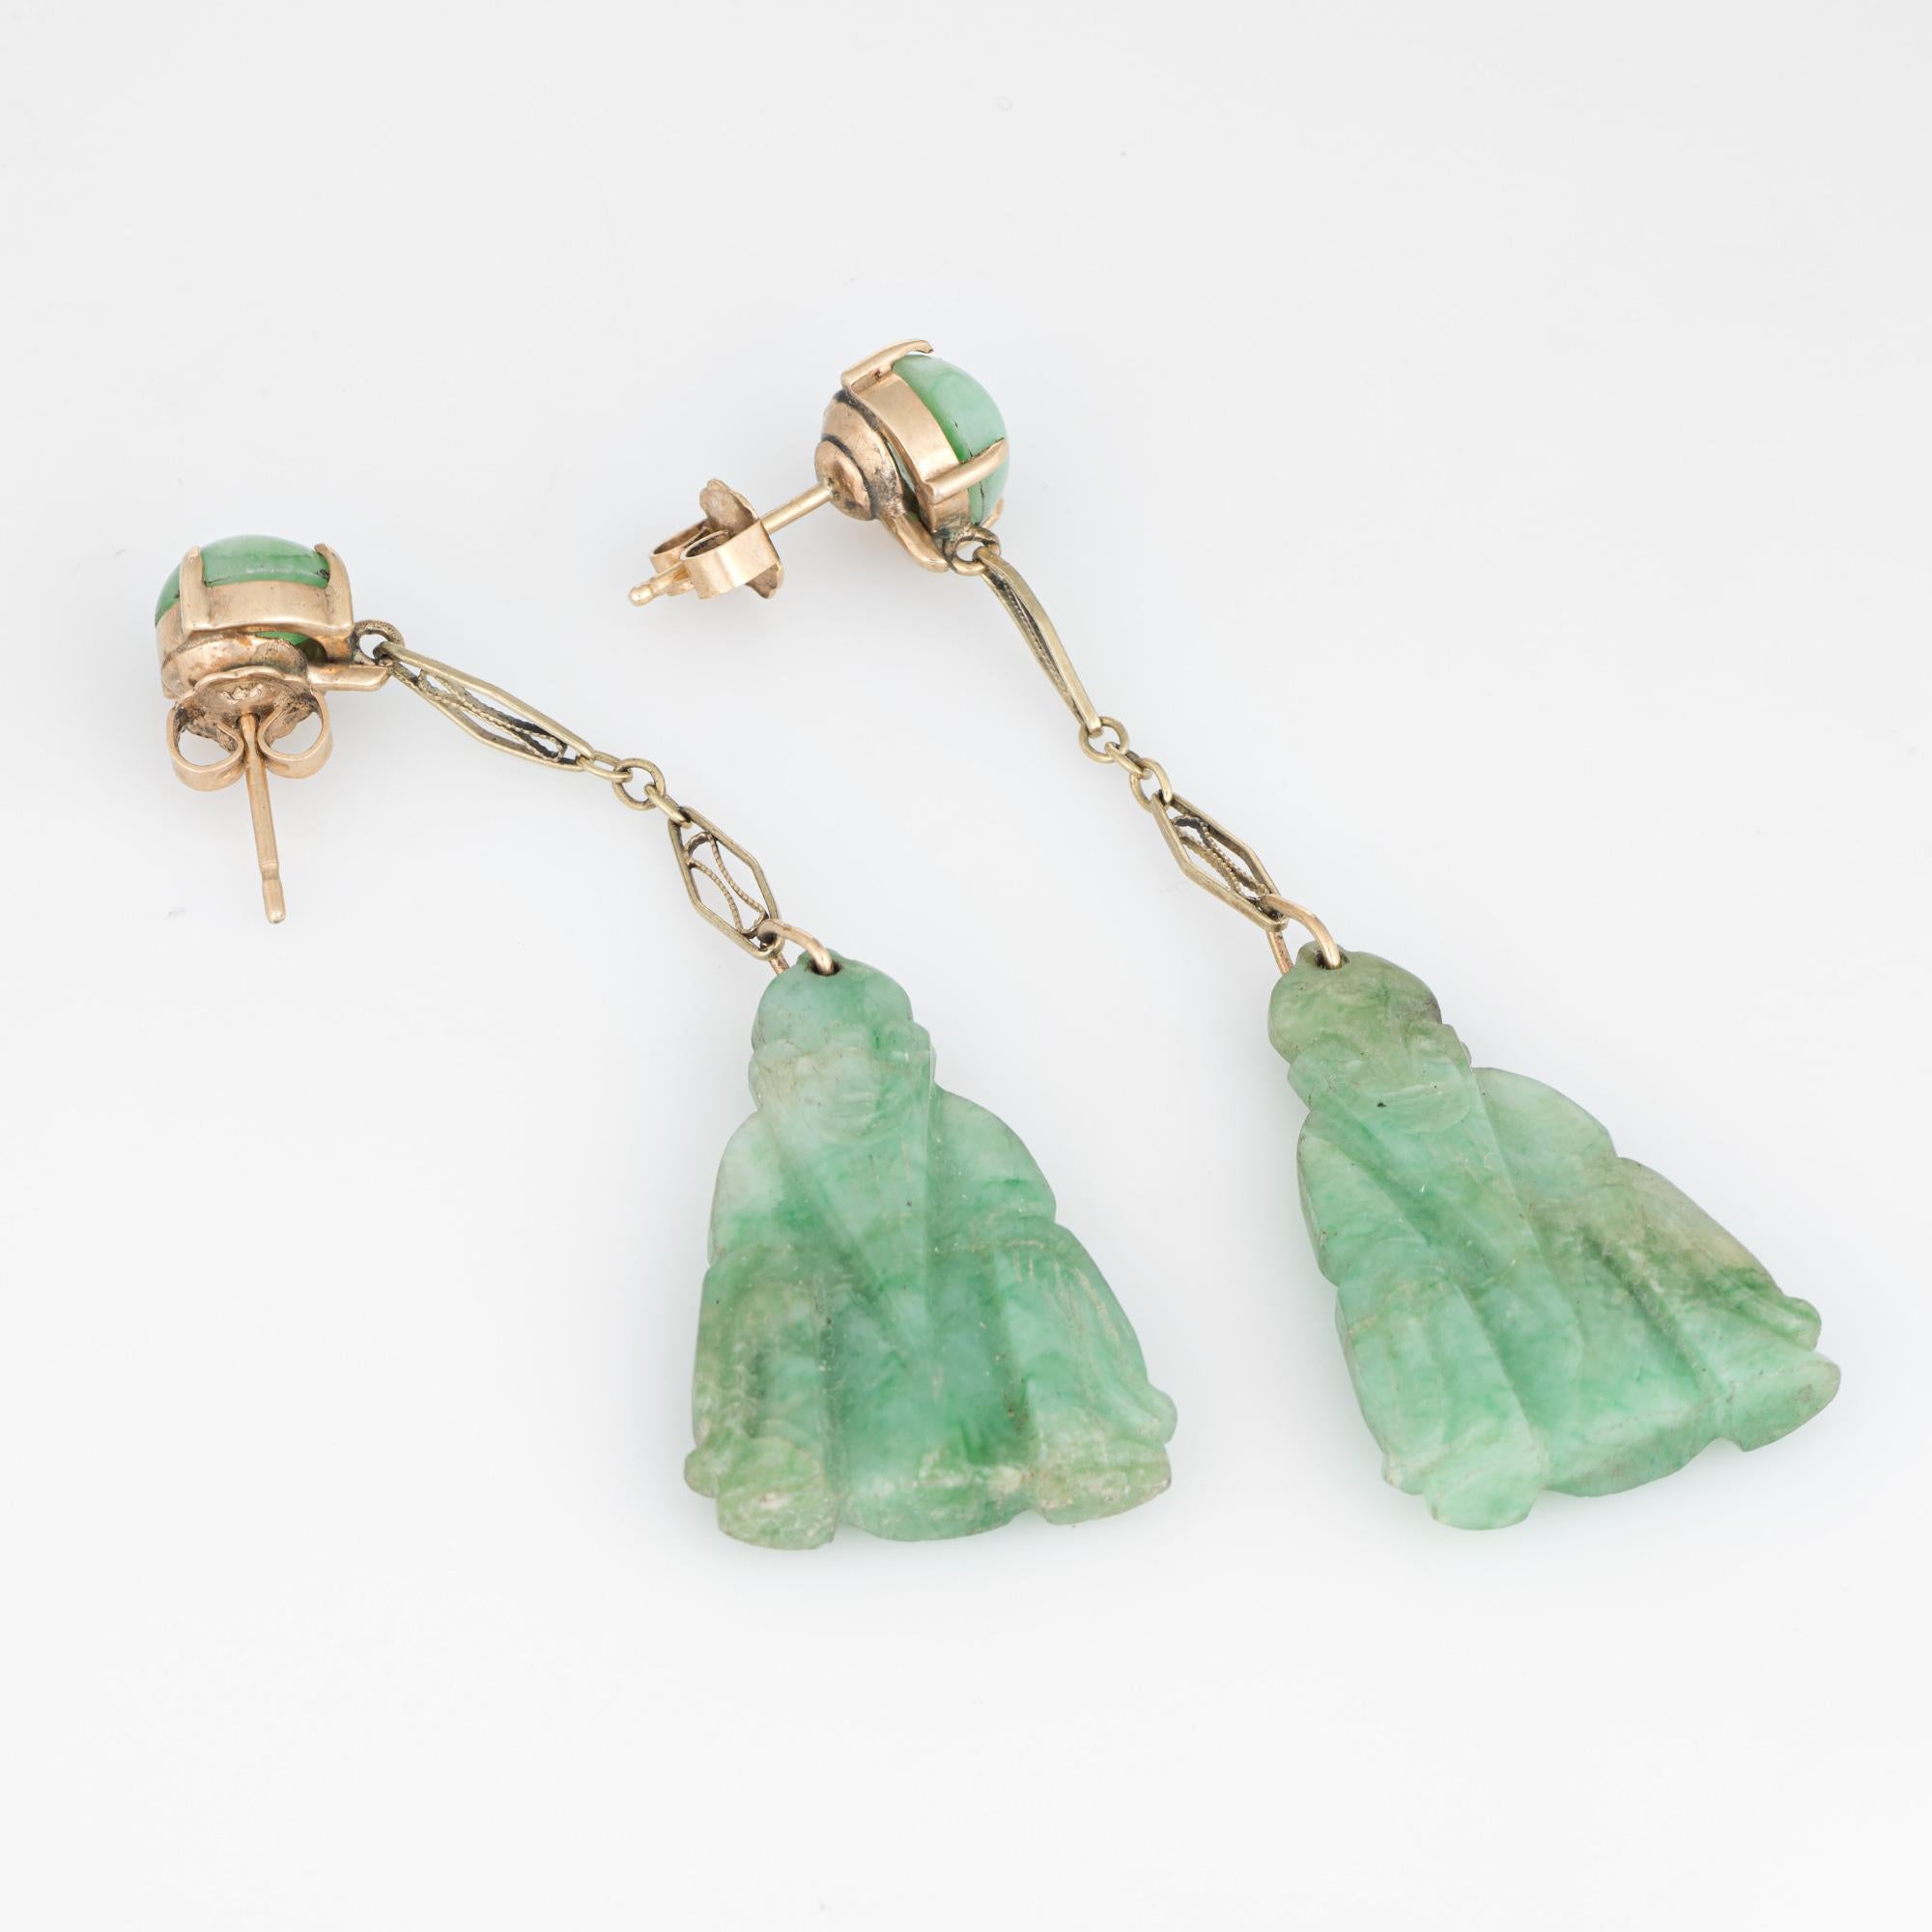 Elegant pair of vintage carved jade buddha earrings (circa 1950s to 1960s) crafted in 14k yellow gold. 

Jade measures 28mm x 18mm (lower) and 8mm (upper). The jade is in excellent condition and free of cracks or chips. 

Jade is carved in the form